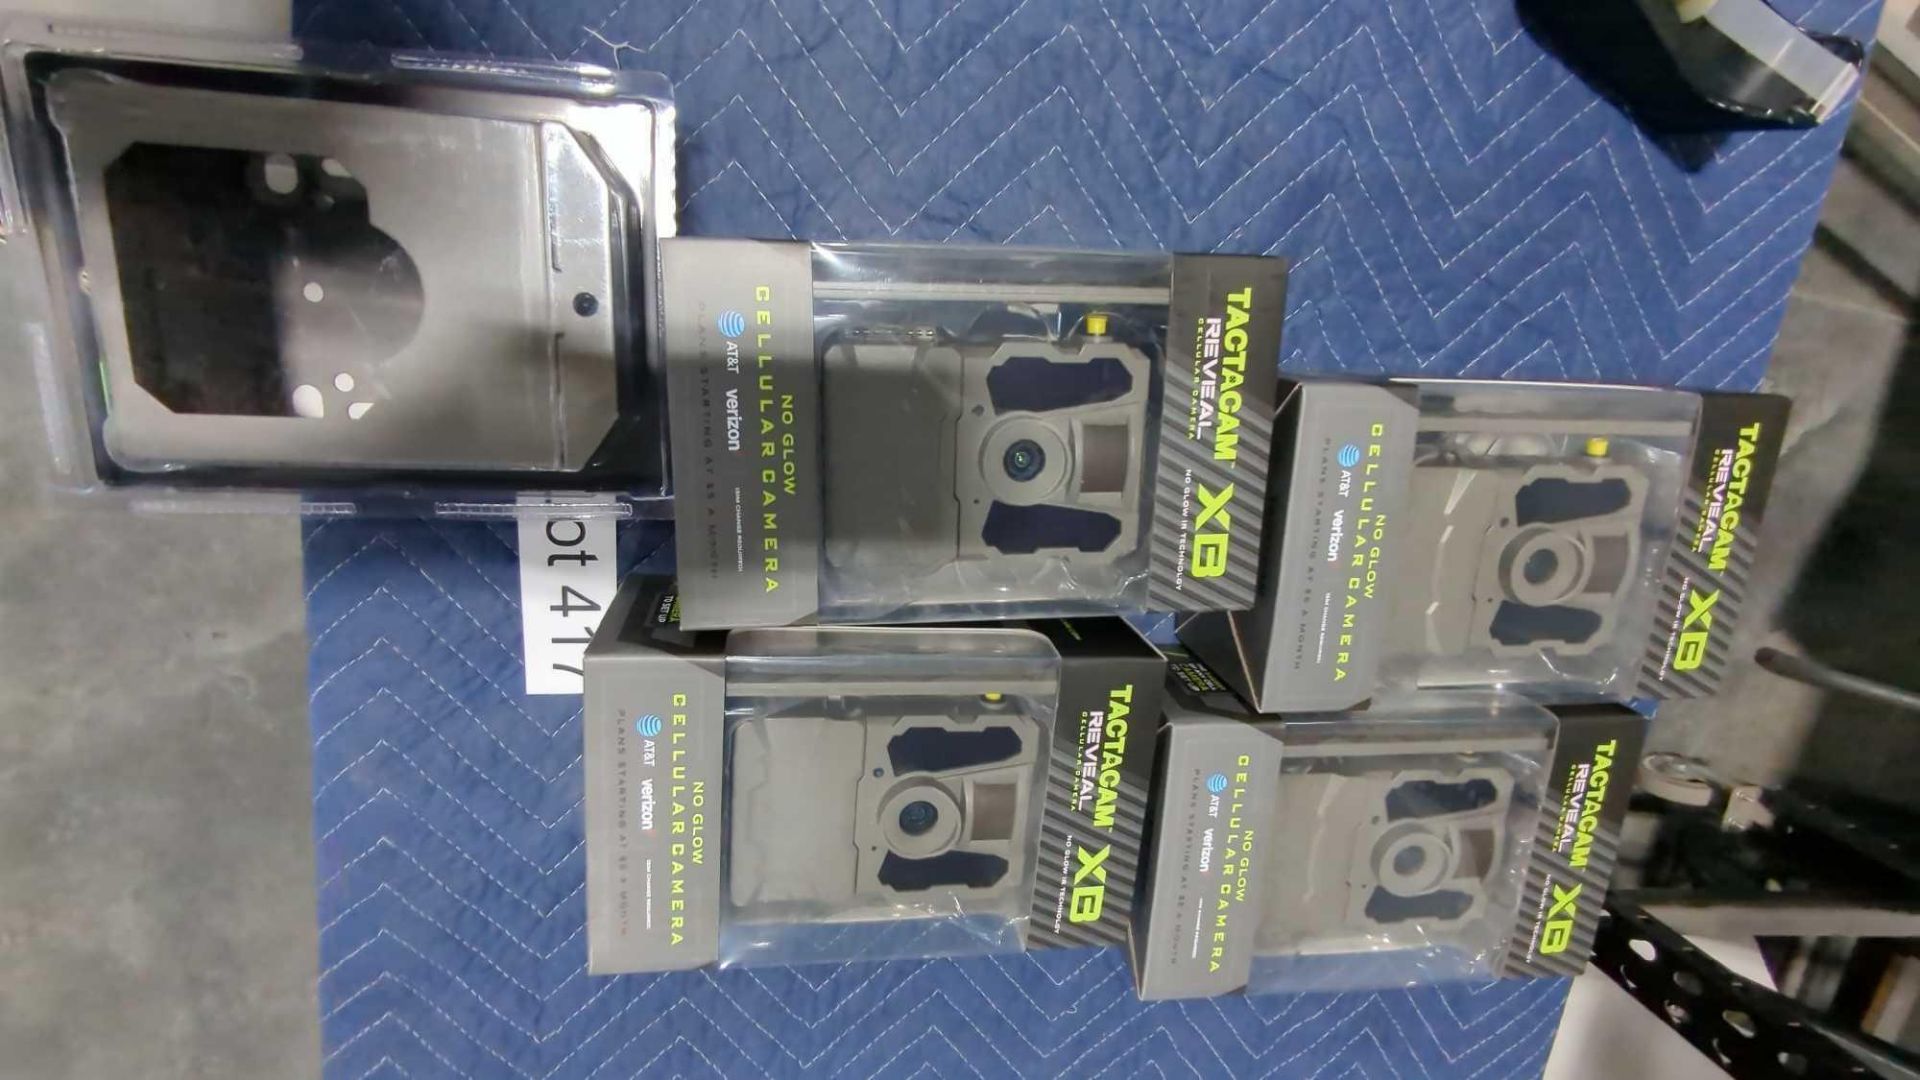 4 Tactacam Reveal Cellular Trail Cameras XB, with single mount box - Image 2 of 5